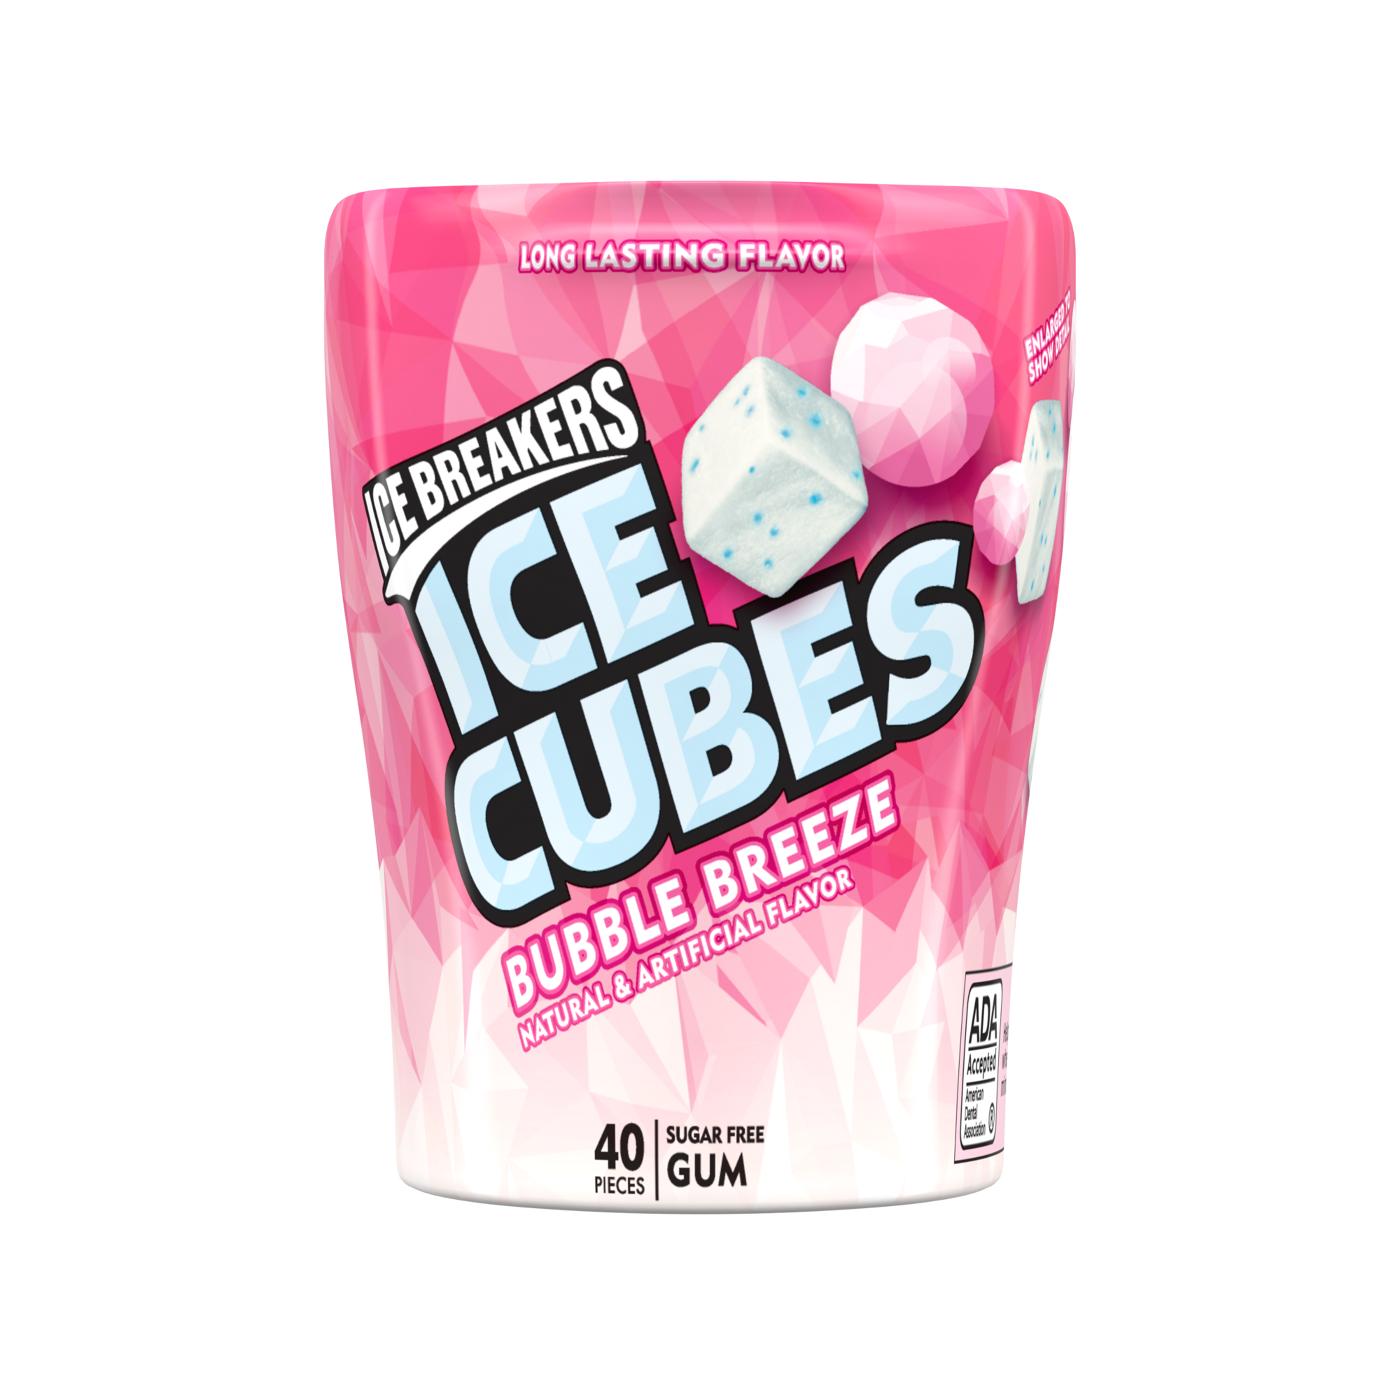 Ice Breakers Ice Cubes Sugar Free Chewing Gum - Bubble Breeze; image 1 of 7